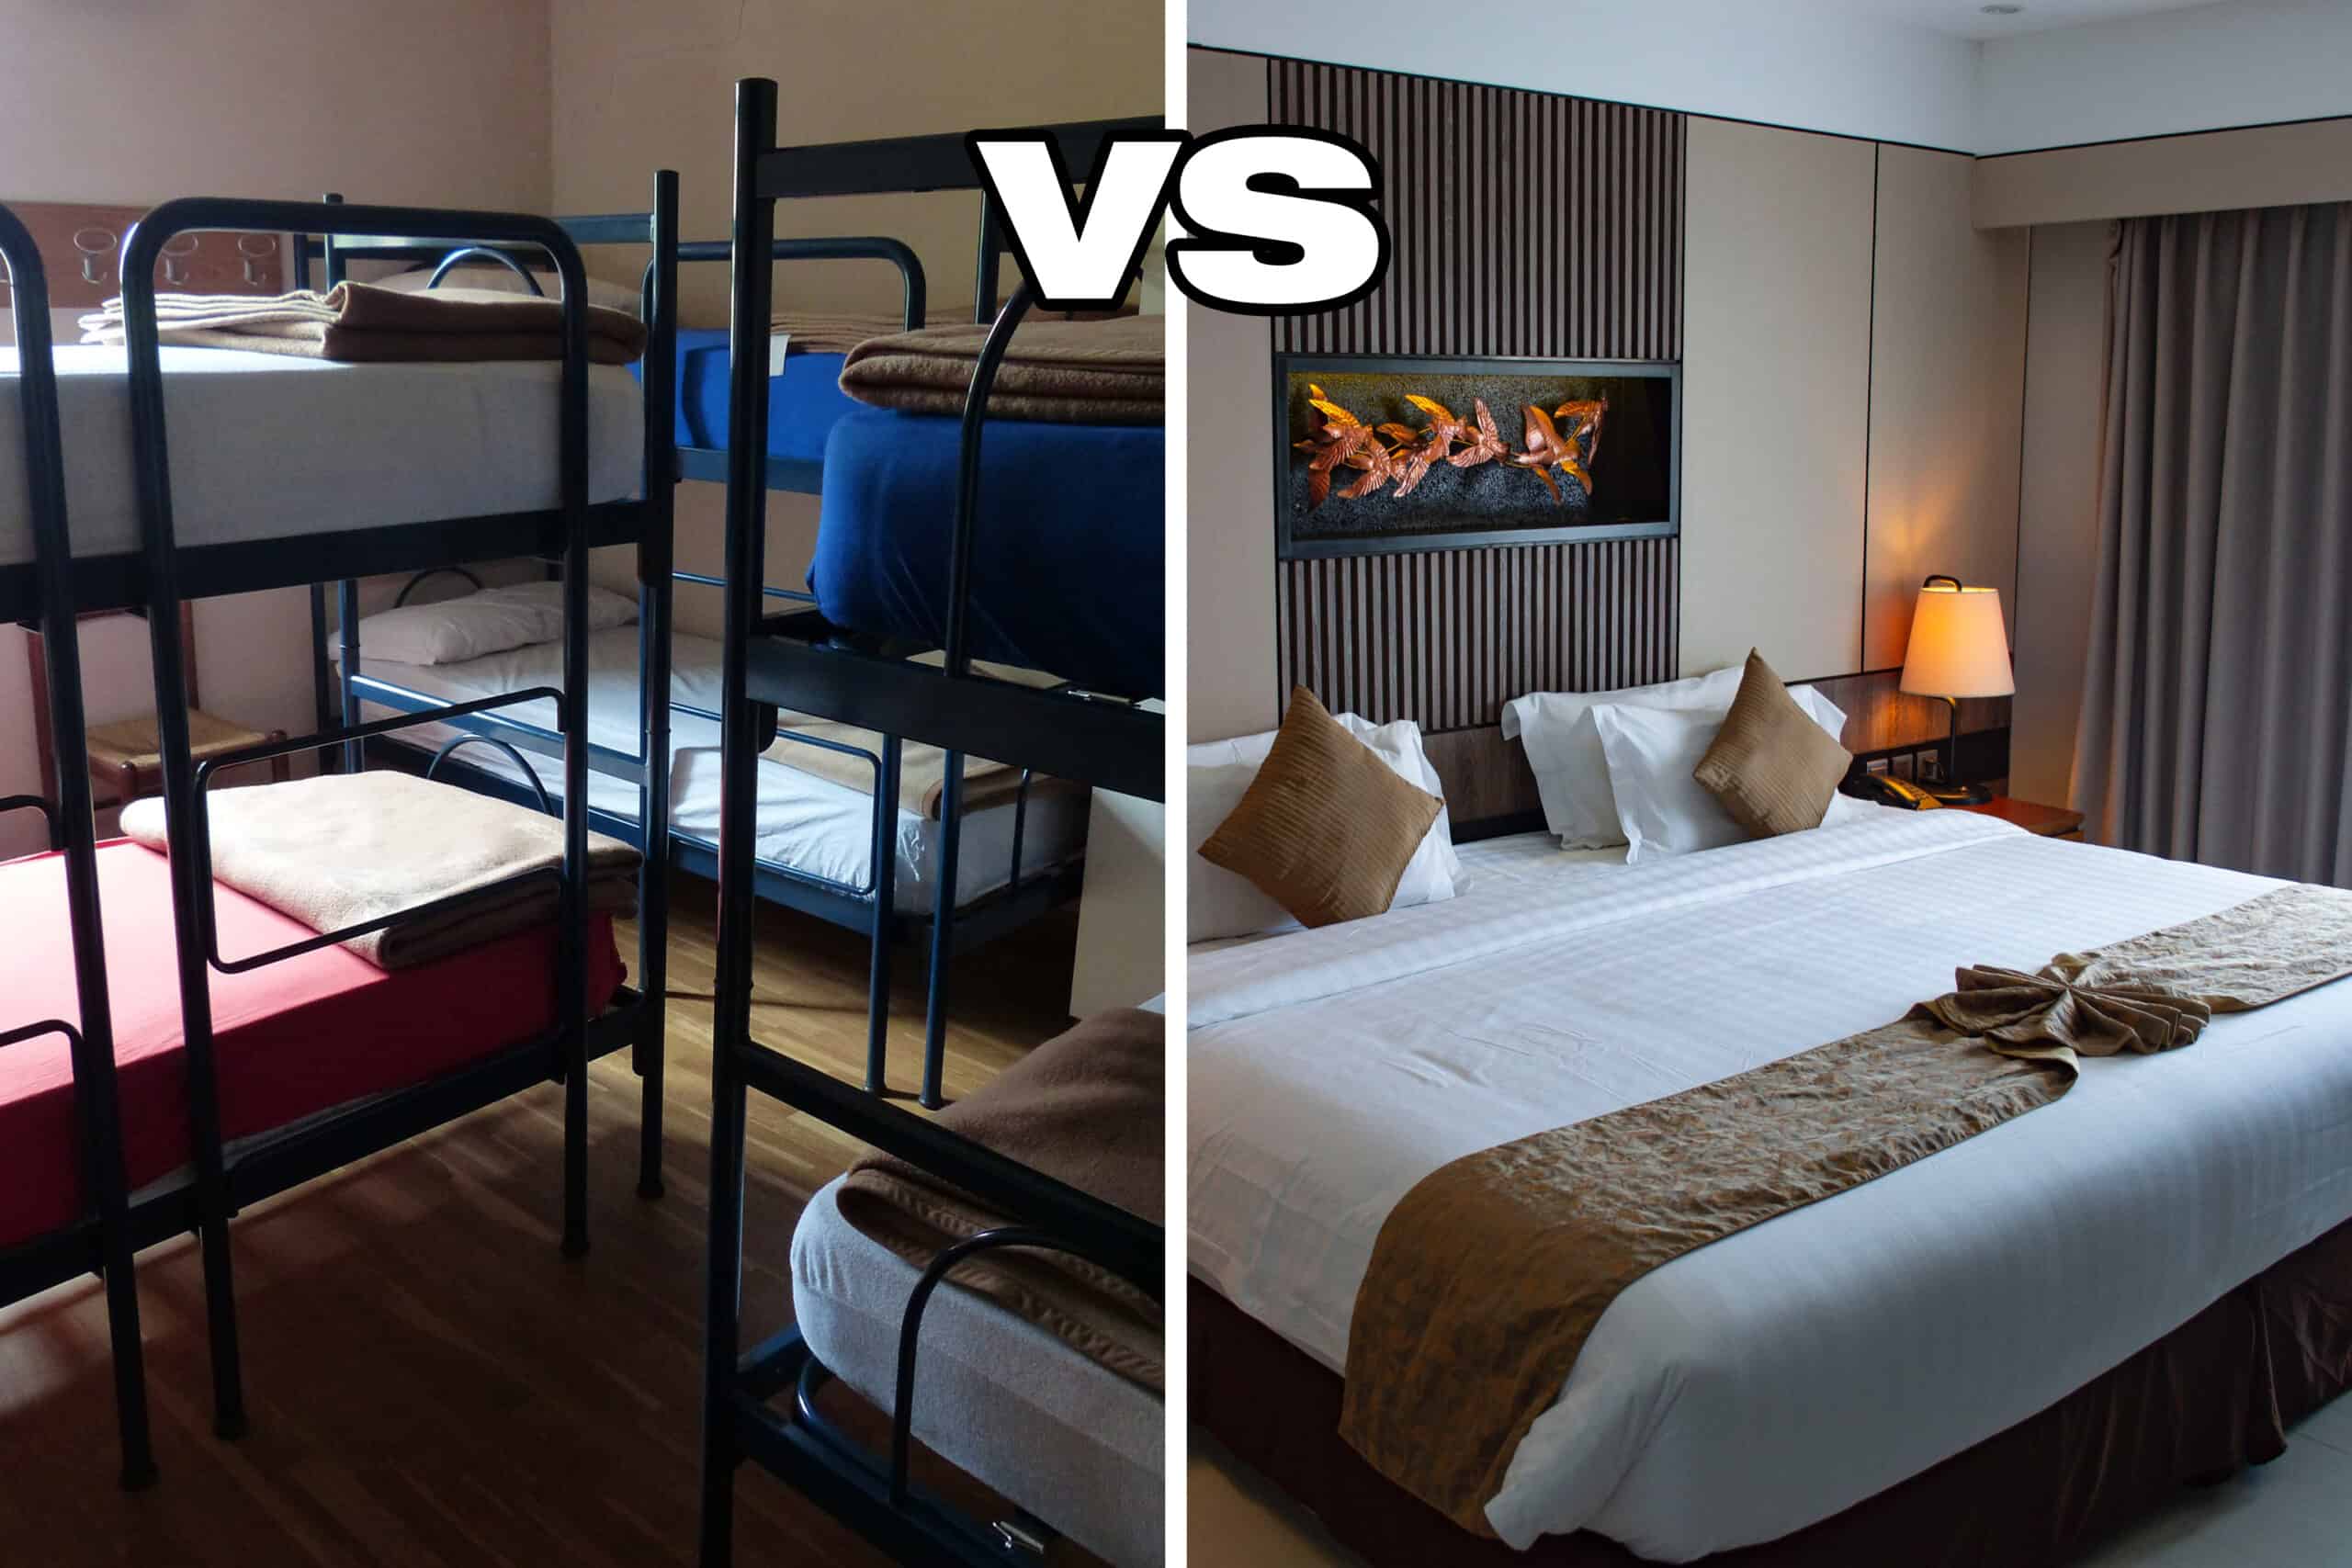 II. Pros and Cons of Staying in a Hotel